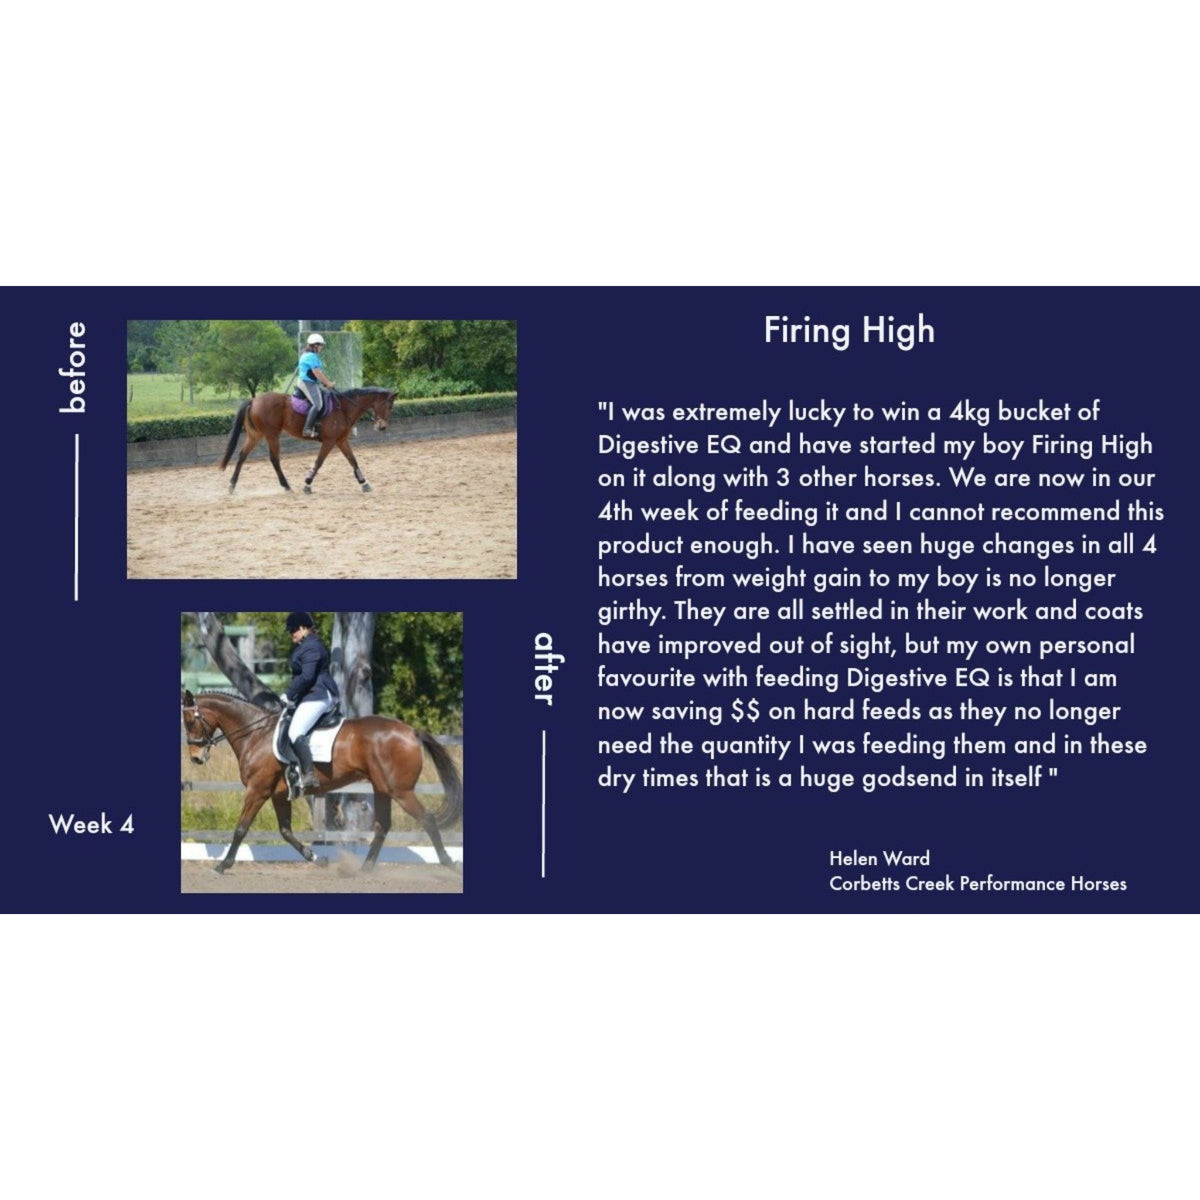 Testimony of a horse on Digestive EQ with quote and images.